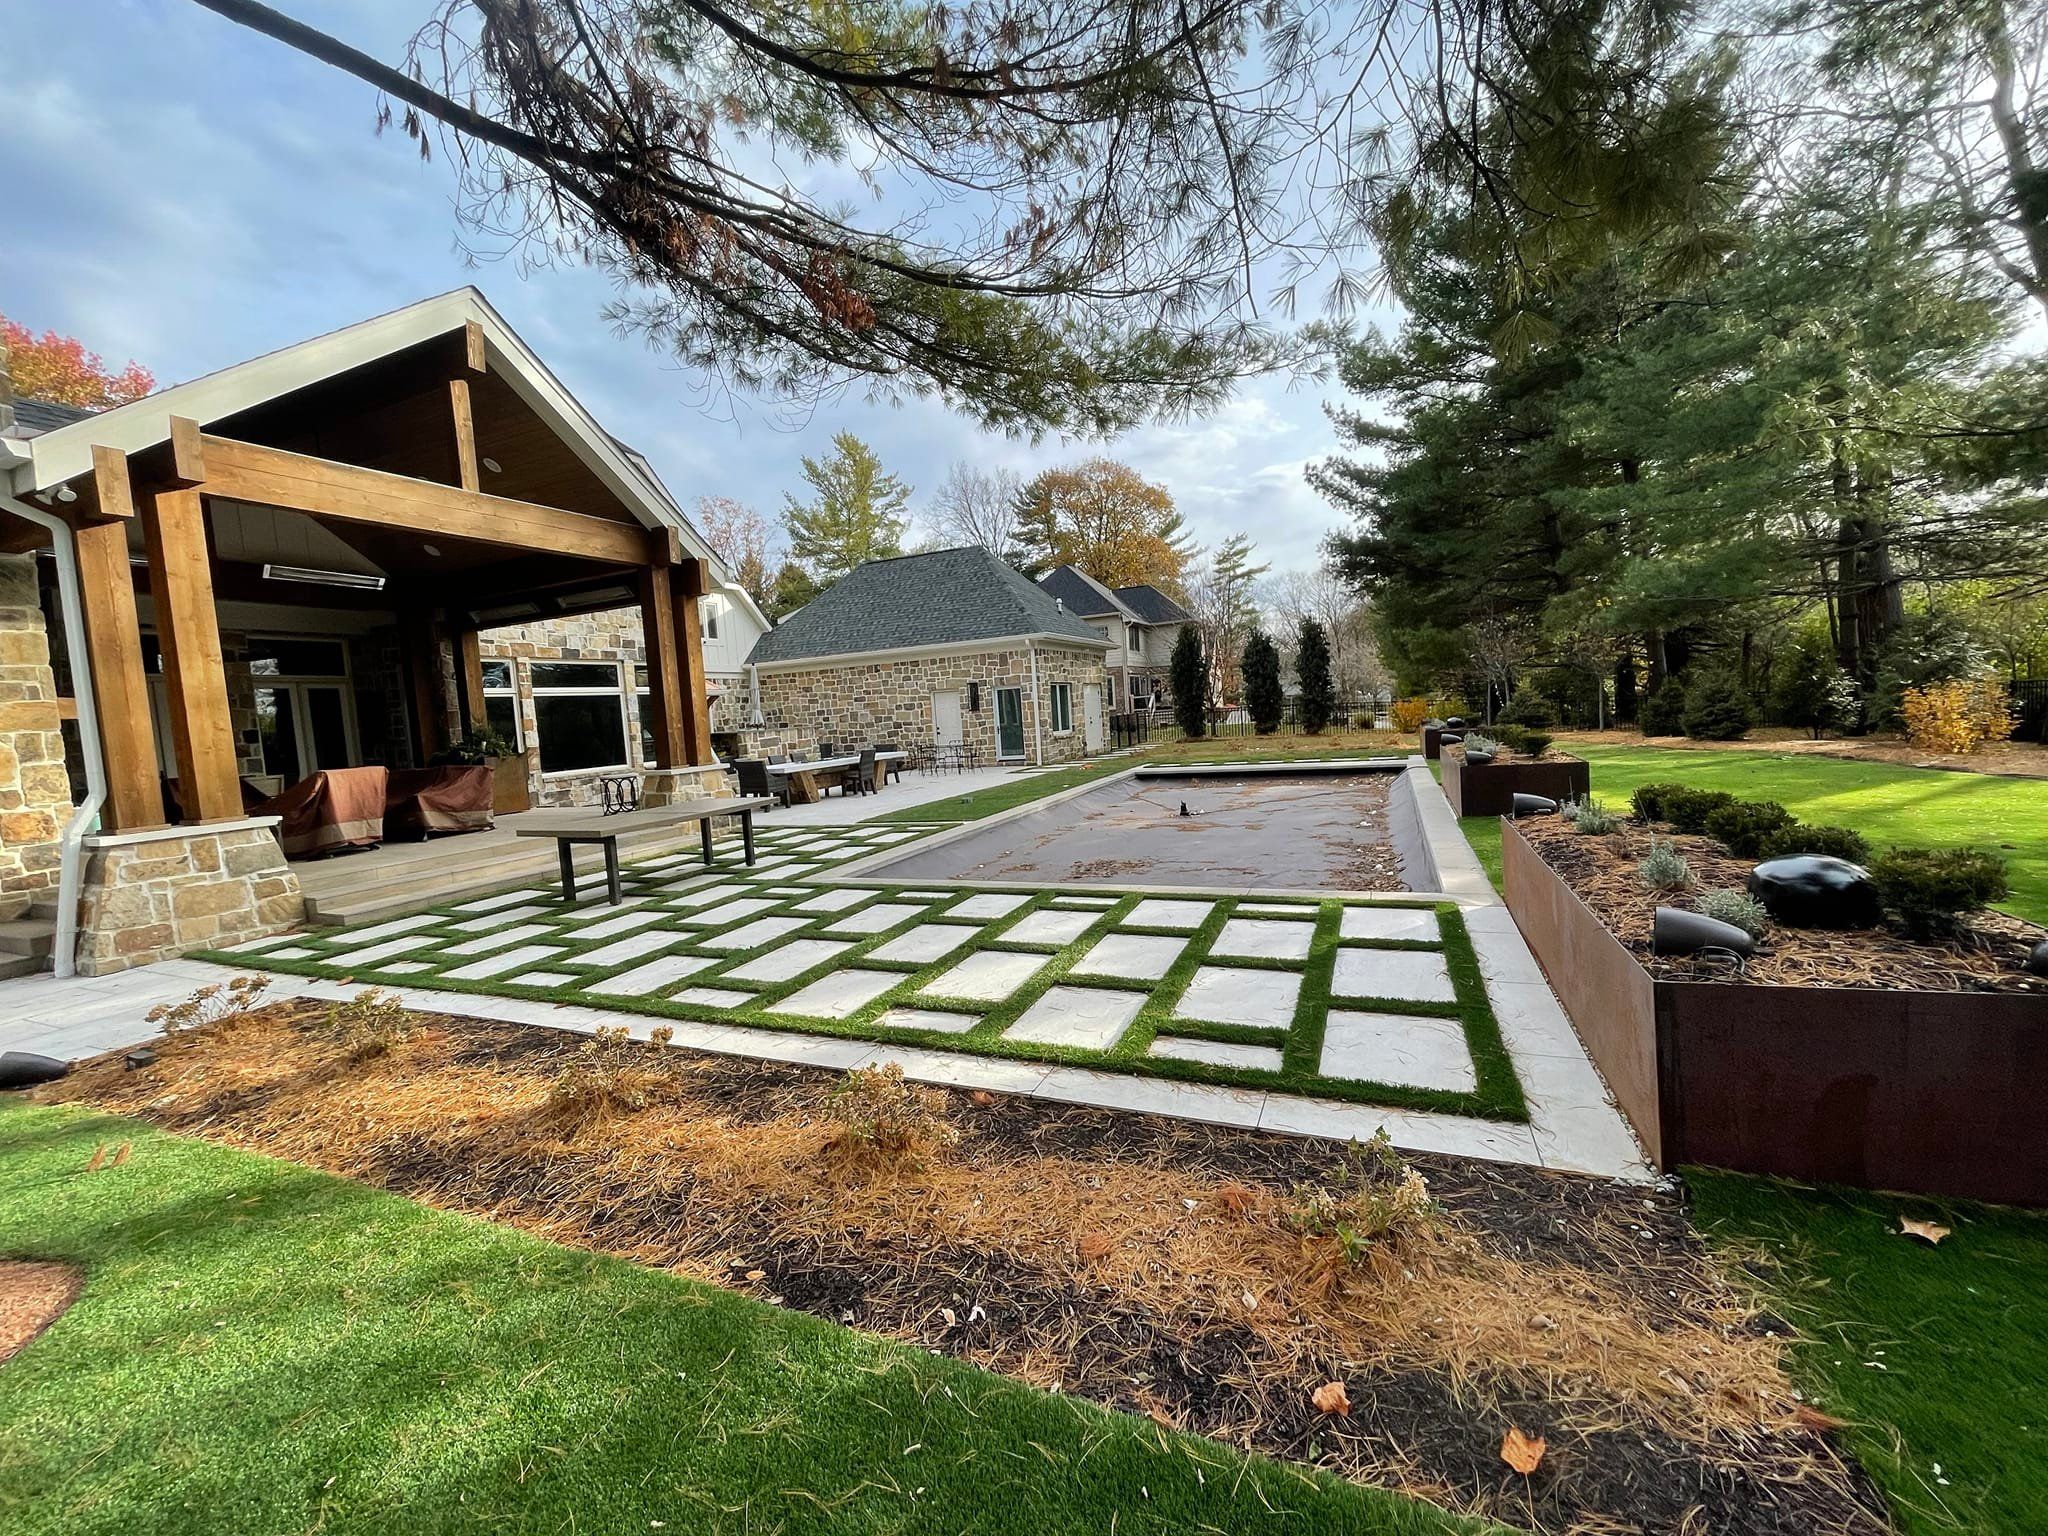 Yard & Driveway Design for P.J.E. Lawn Care & Landscaping in Indianapolis, IN